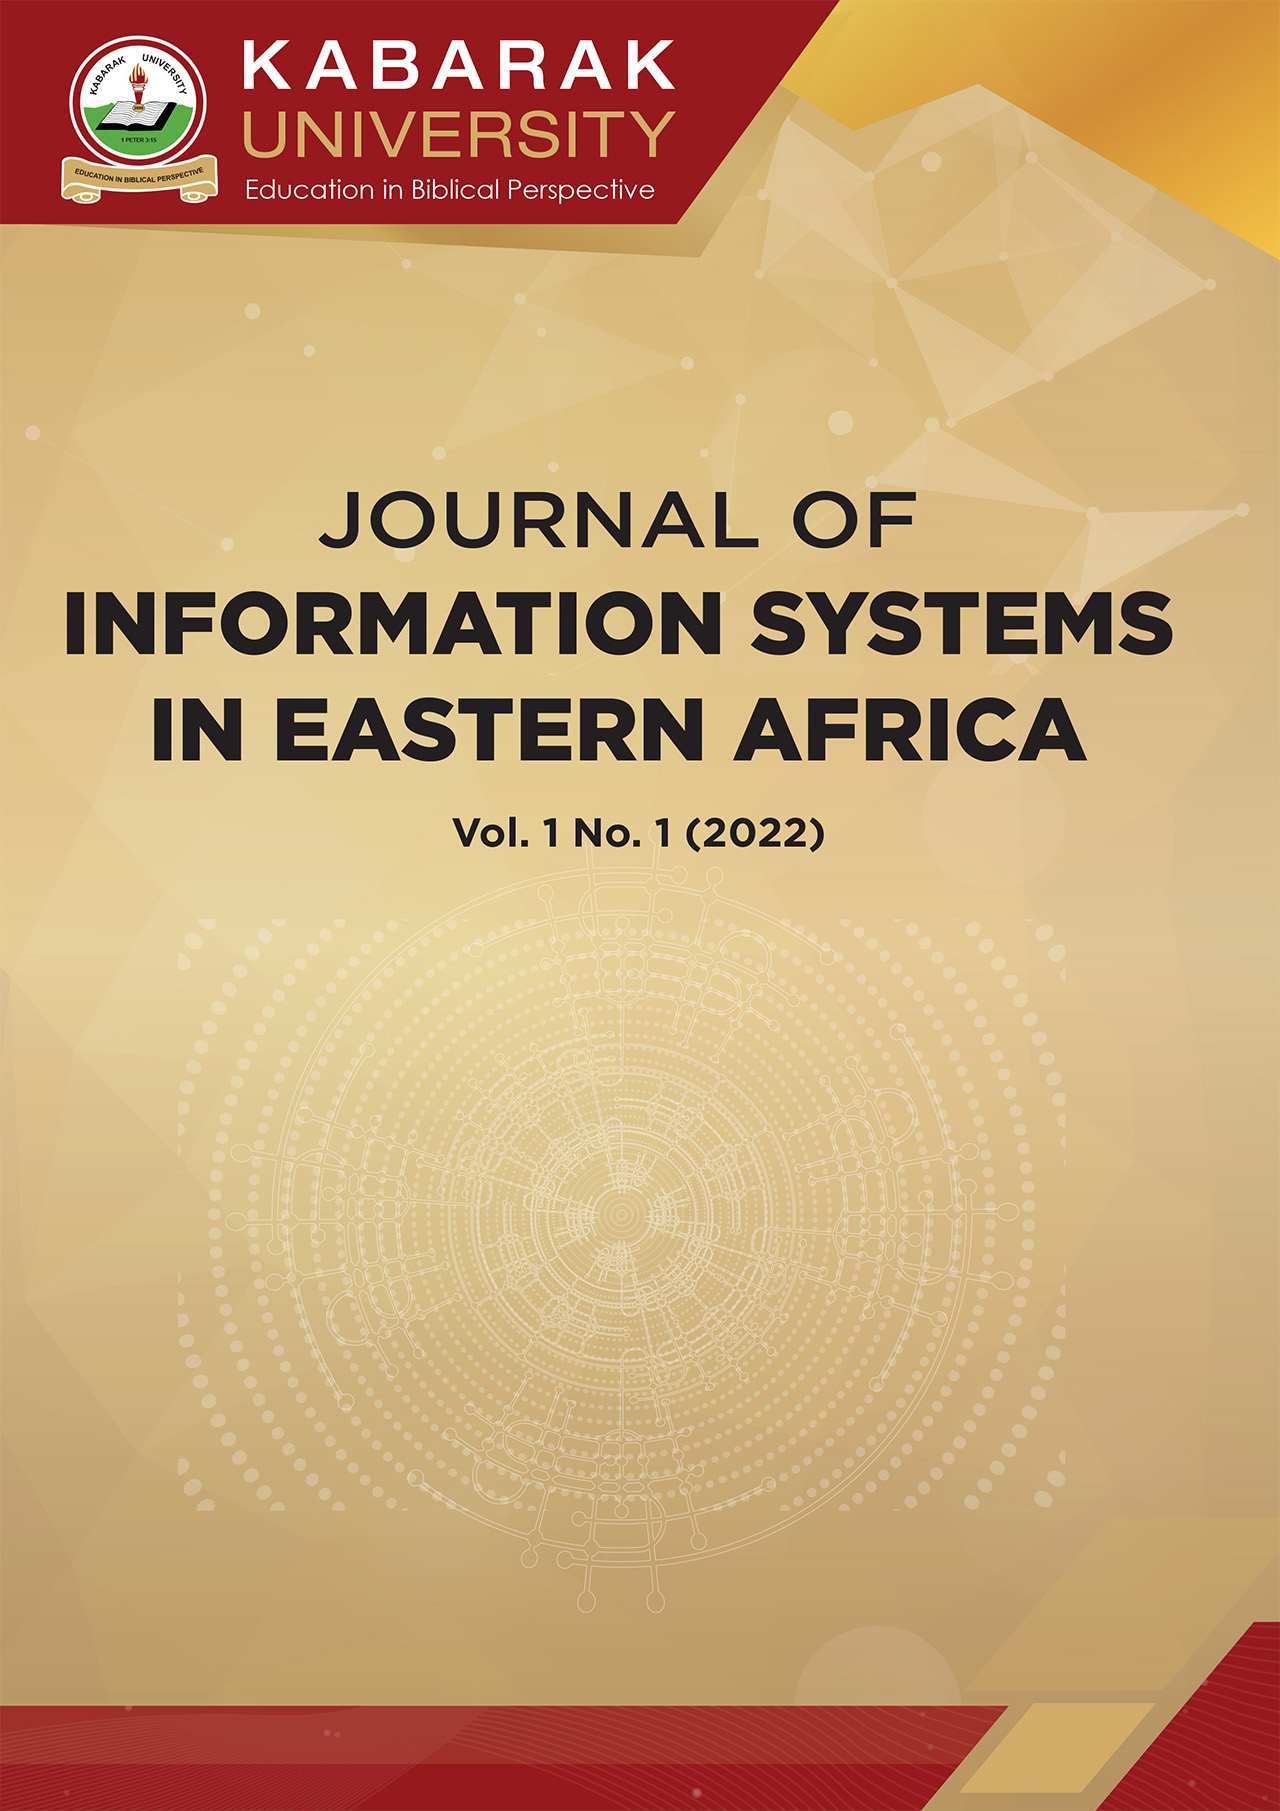 					View Vol. 1 No. 1 (2011): Journal of Information Systems in Eastern Africa
				